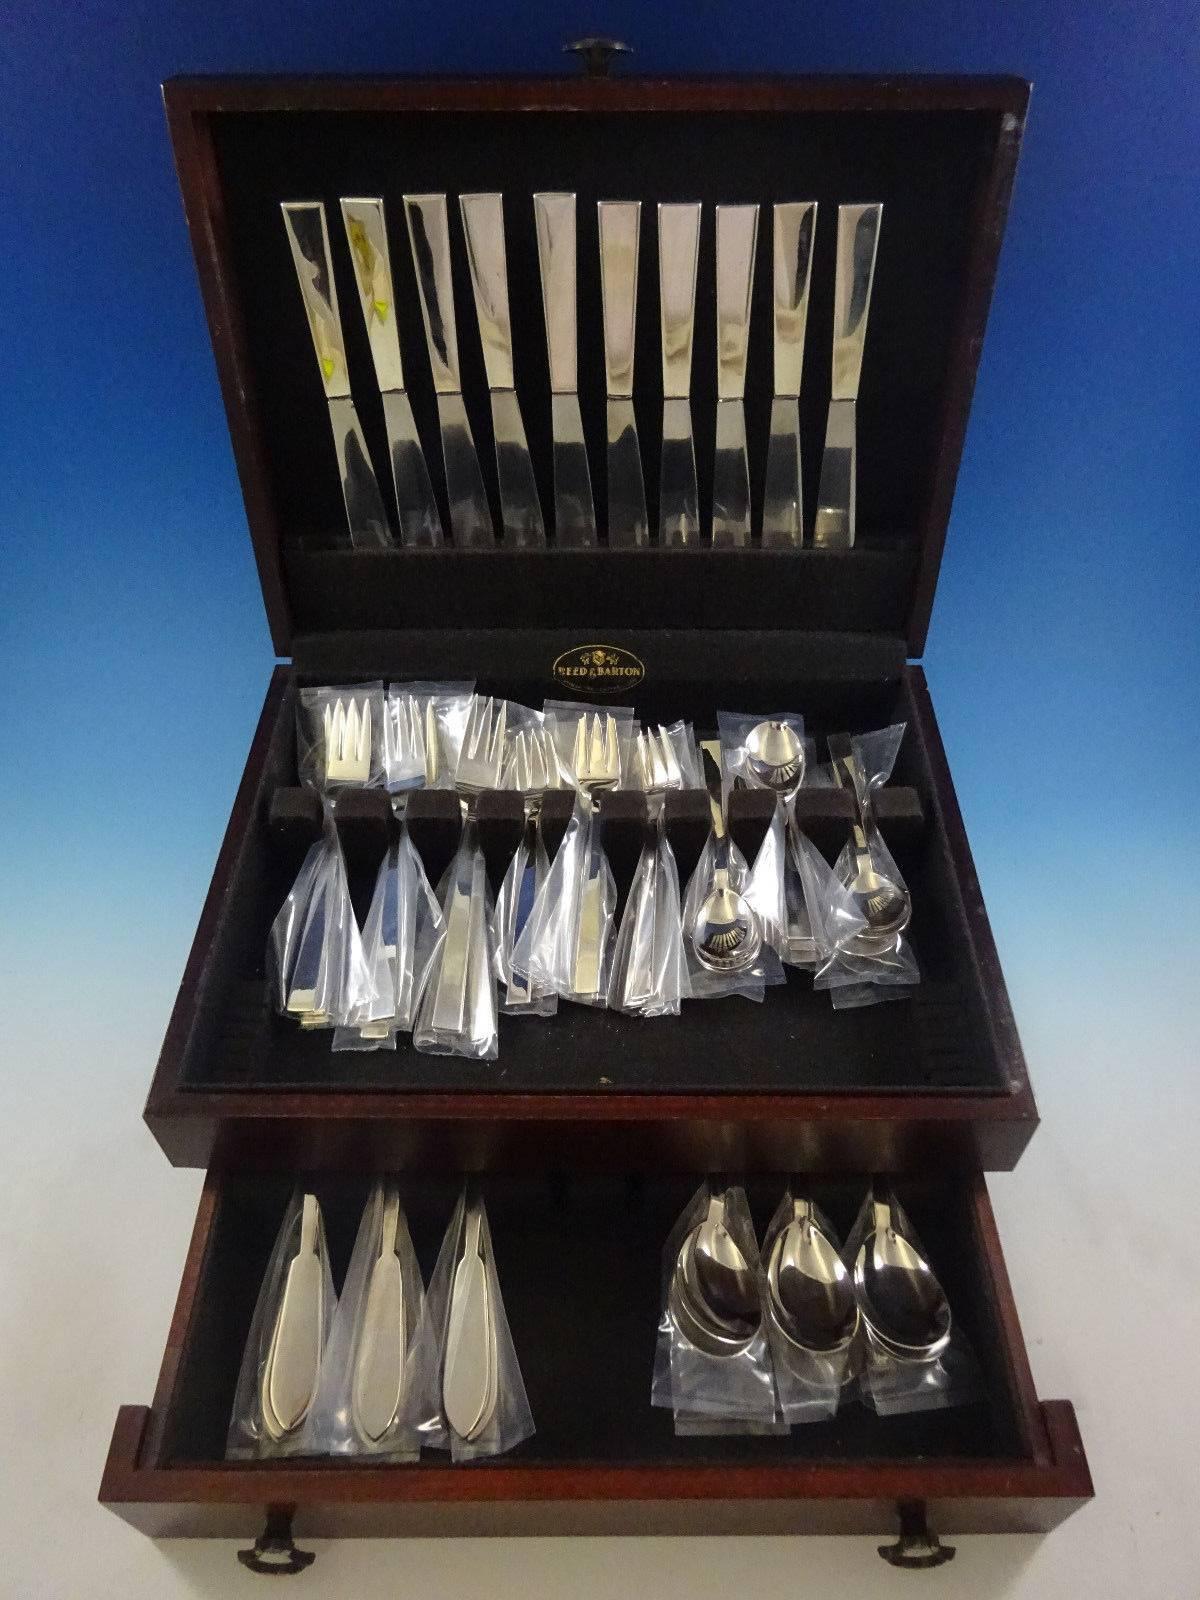 Moderne by Adra sterling silver flatware set of 60 pieces. This set includes: 

Ten dinner knives, 9 1/8